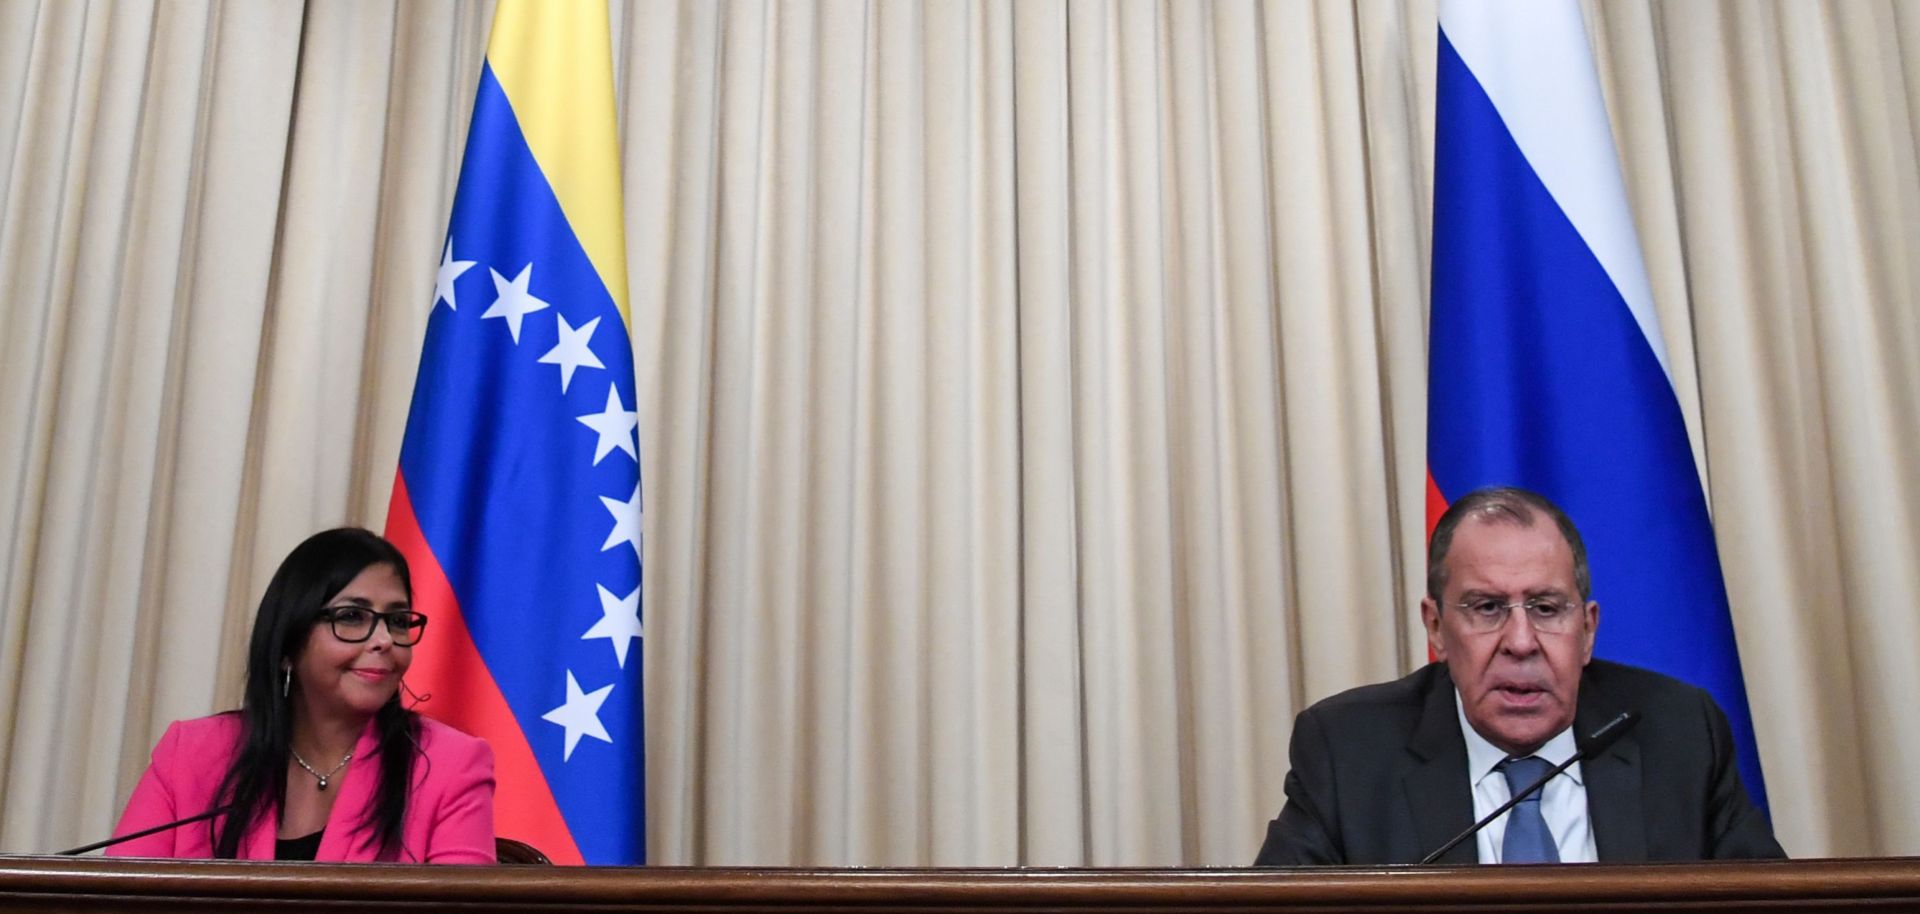 Russian Foreign Minister Sergei Lavrov (right) holds a joint press conference with Venezuelan Vice President Delcy Rodriguez following their meeting in Moscow on Mar. 1, 2019.